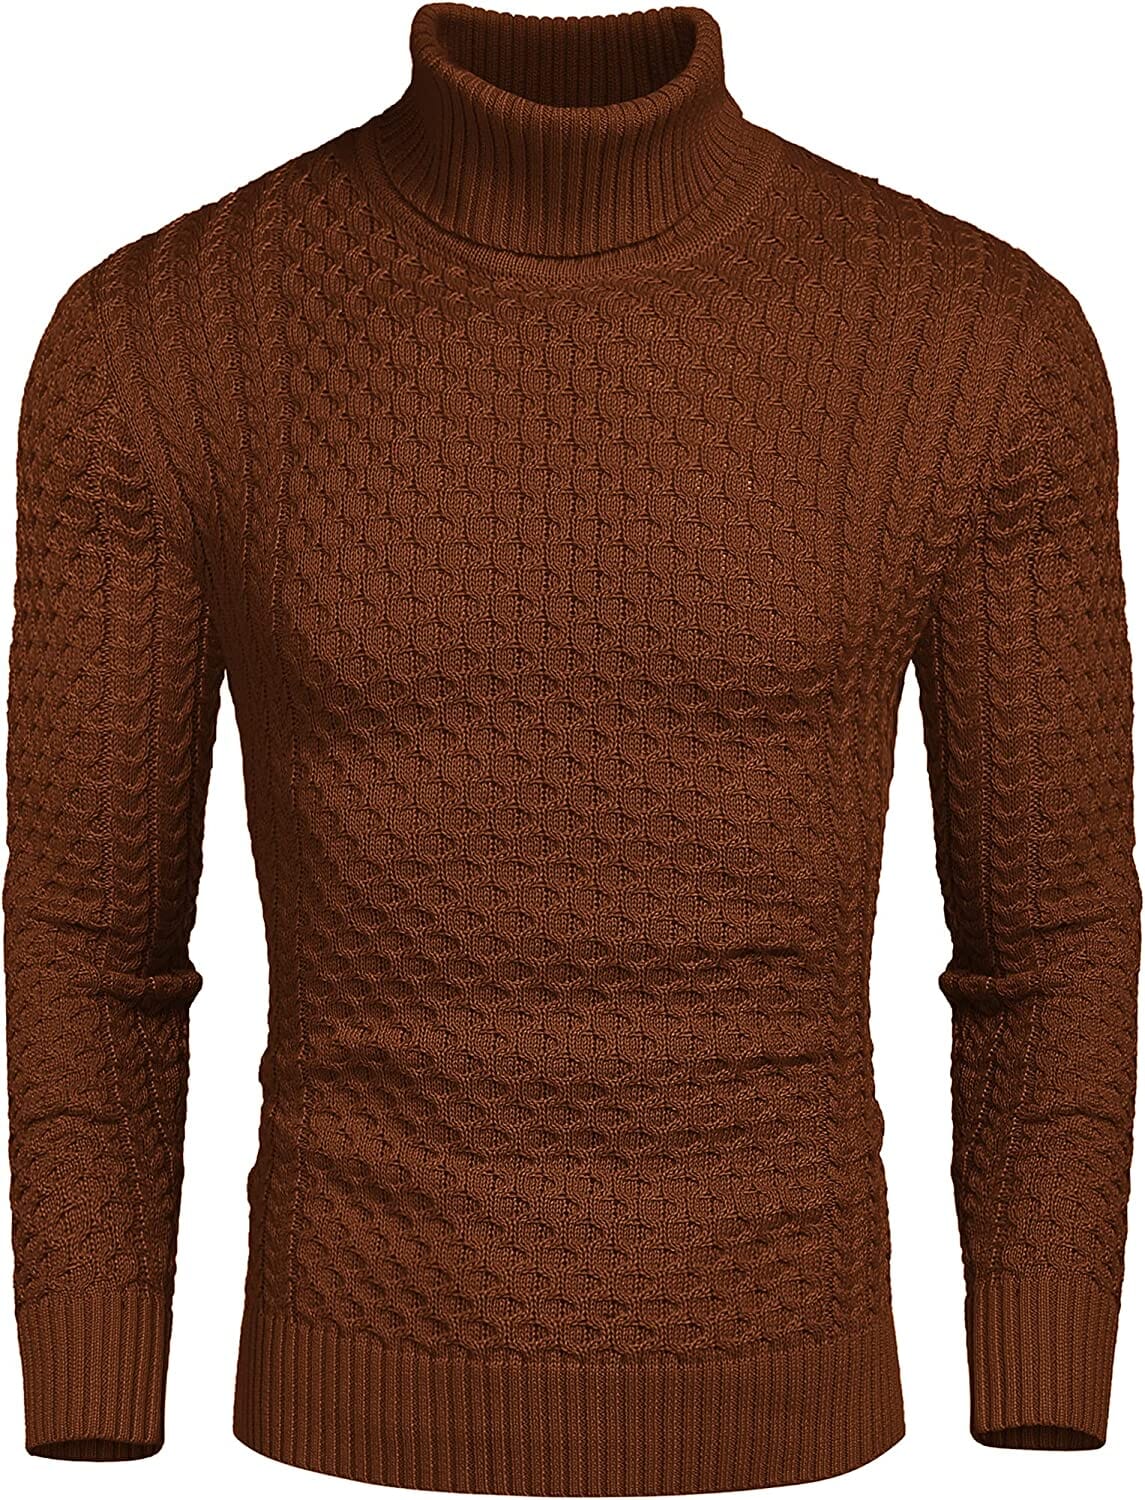 Slim Fit Turtleneck Knitted Twisted Pullover Sweaters (US Only) Sweaters Coofandy's 